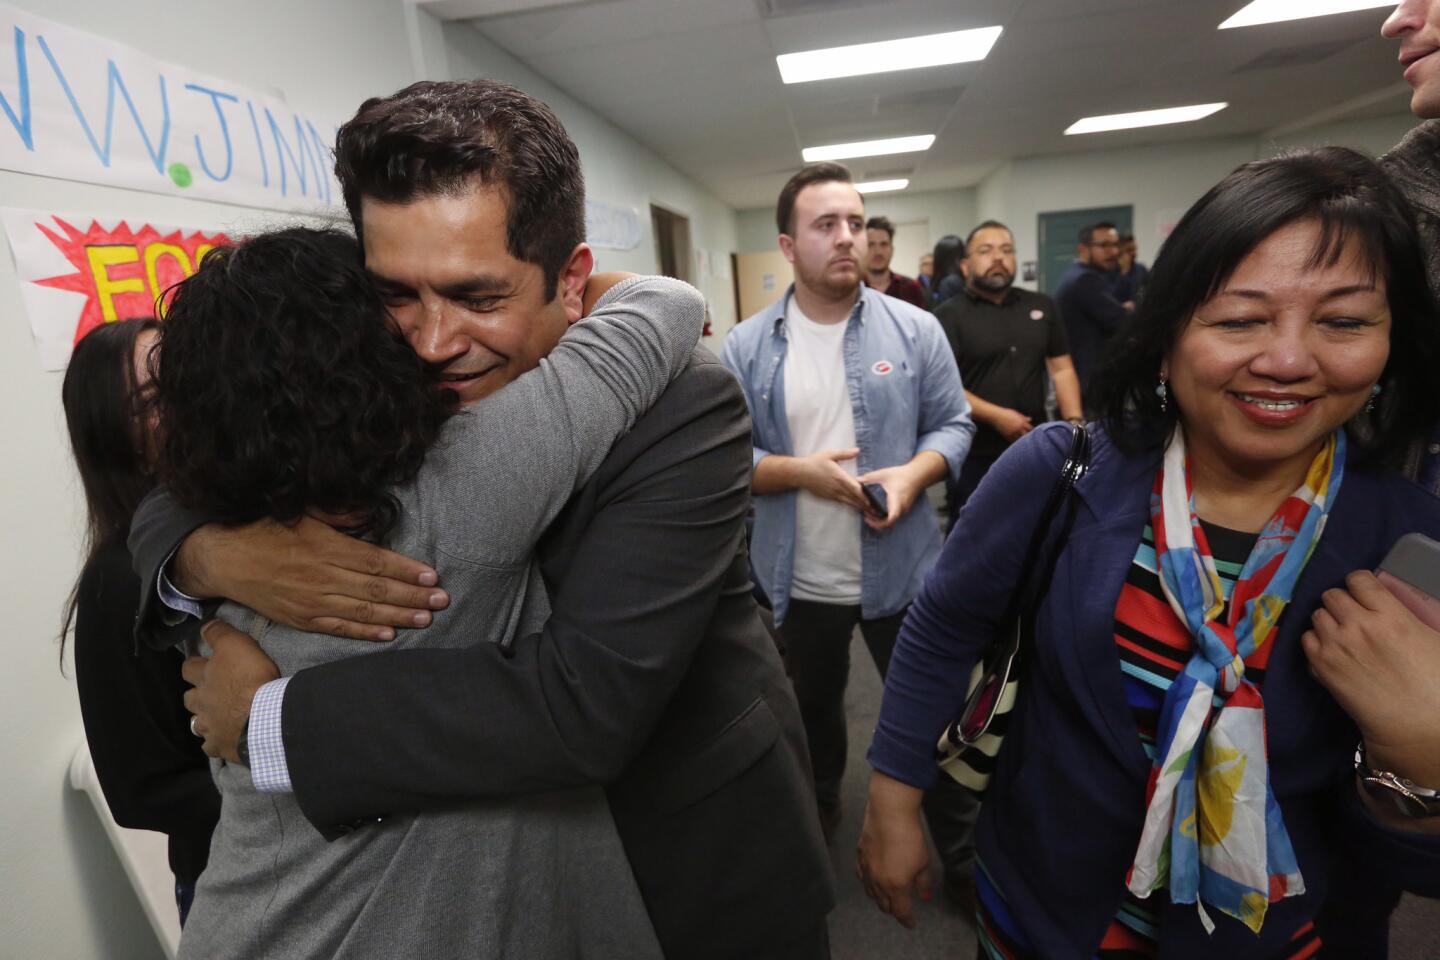 California Assemblyman Jimmy Gomez, a candidate for the 34th Congressional District seat, greets a supporter at election night headquarters in Highland Park in Los Angeles.